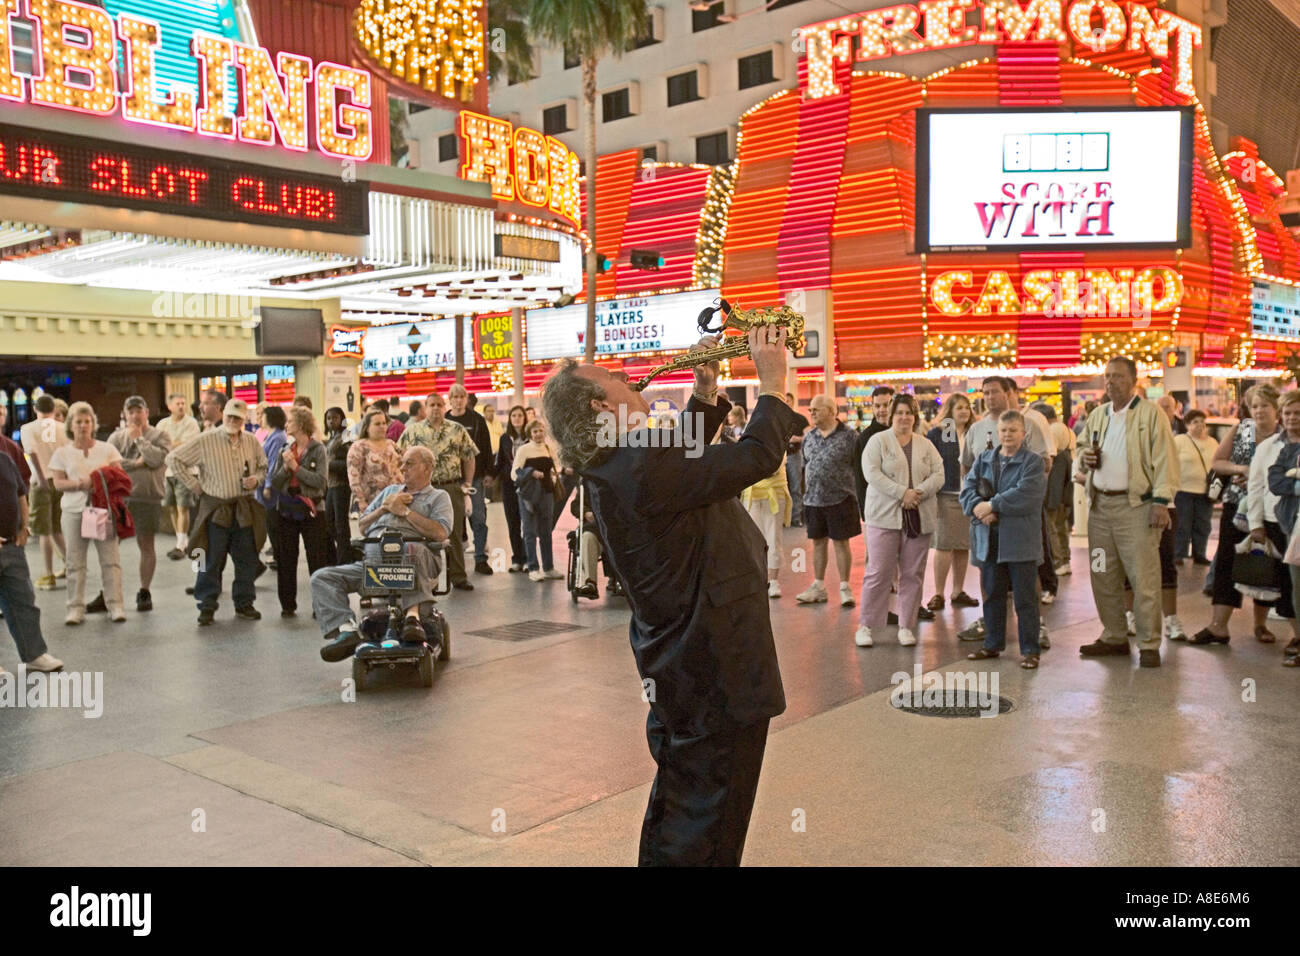 Downtown, Las Vegas - Fremont Street Experience under a massive electronic canopy - Saxophonist entertains crowd Stock Photo